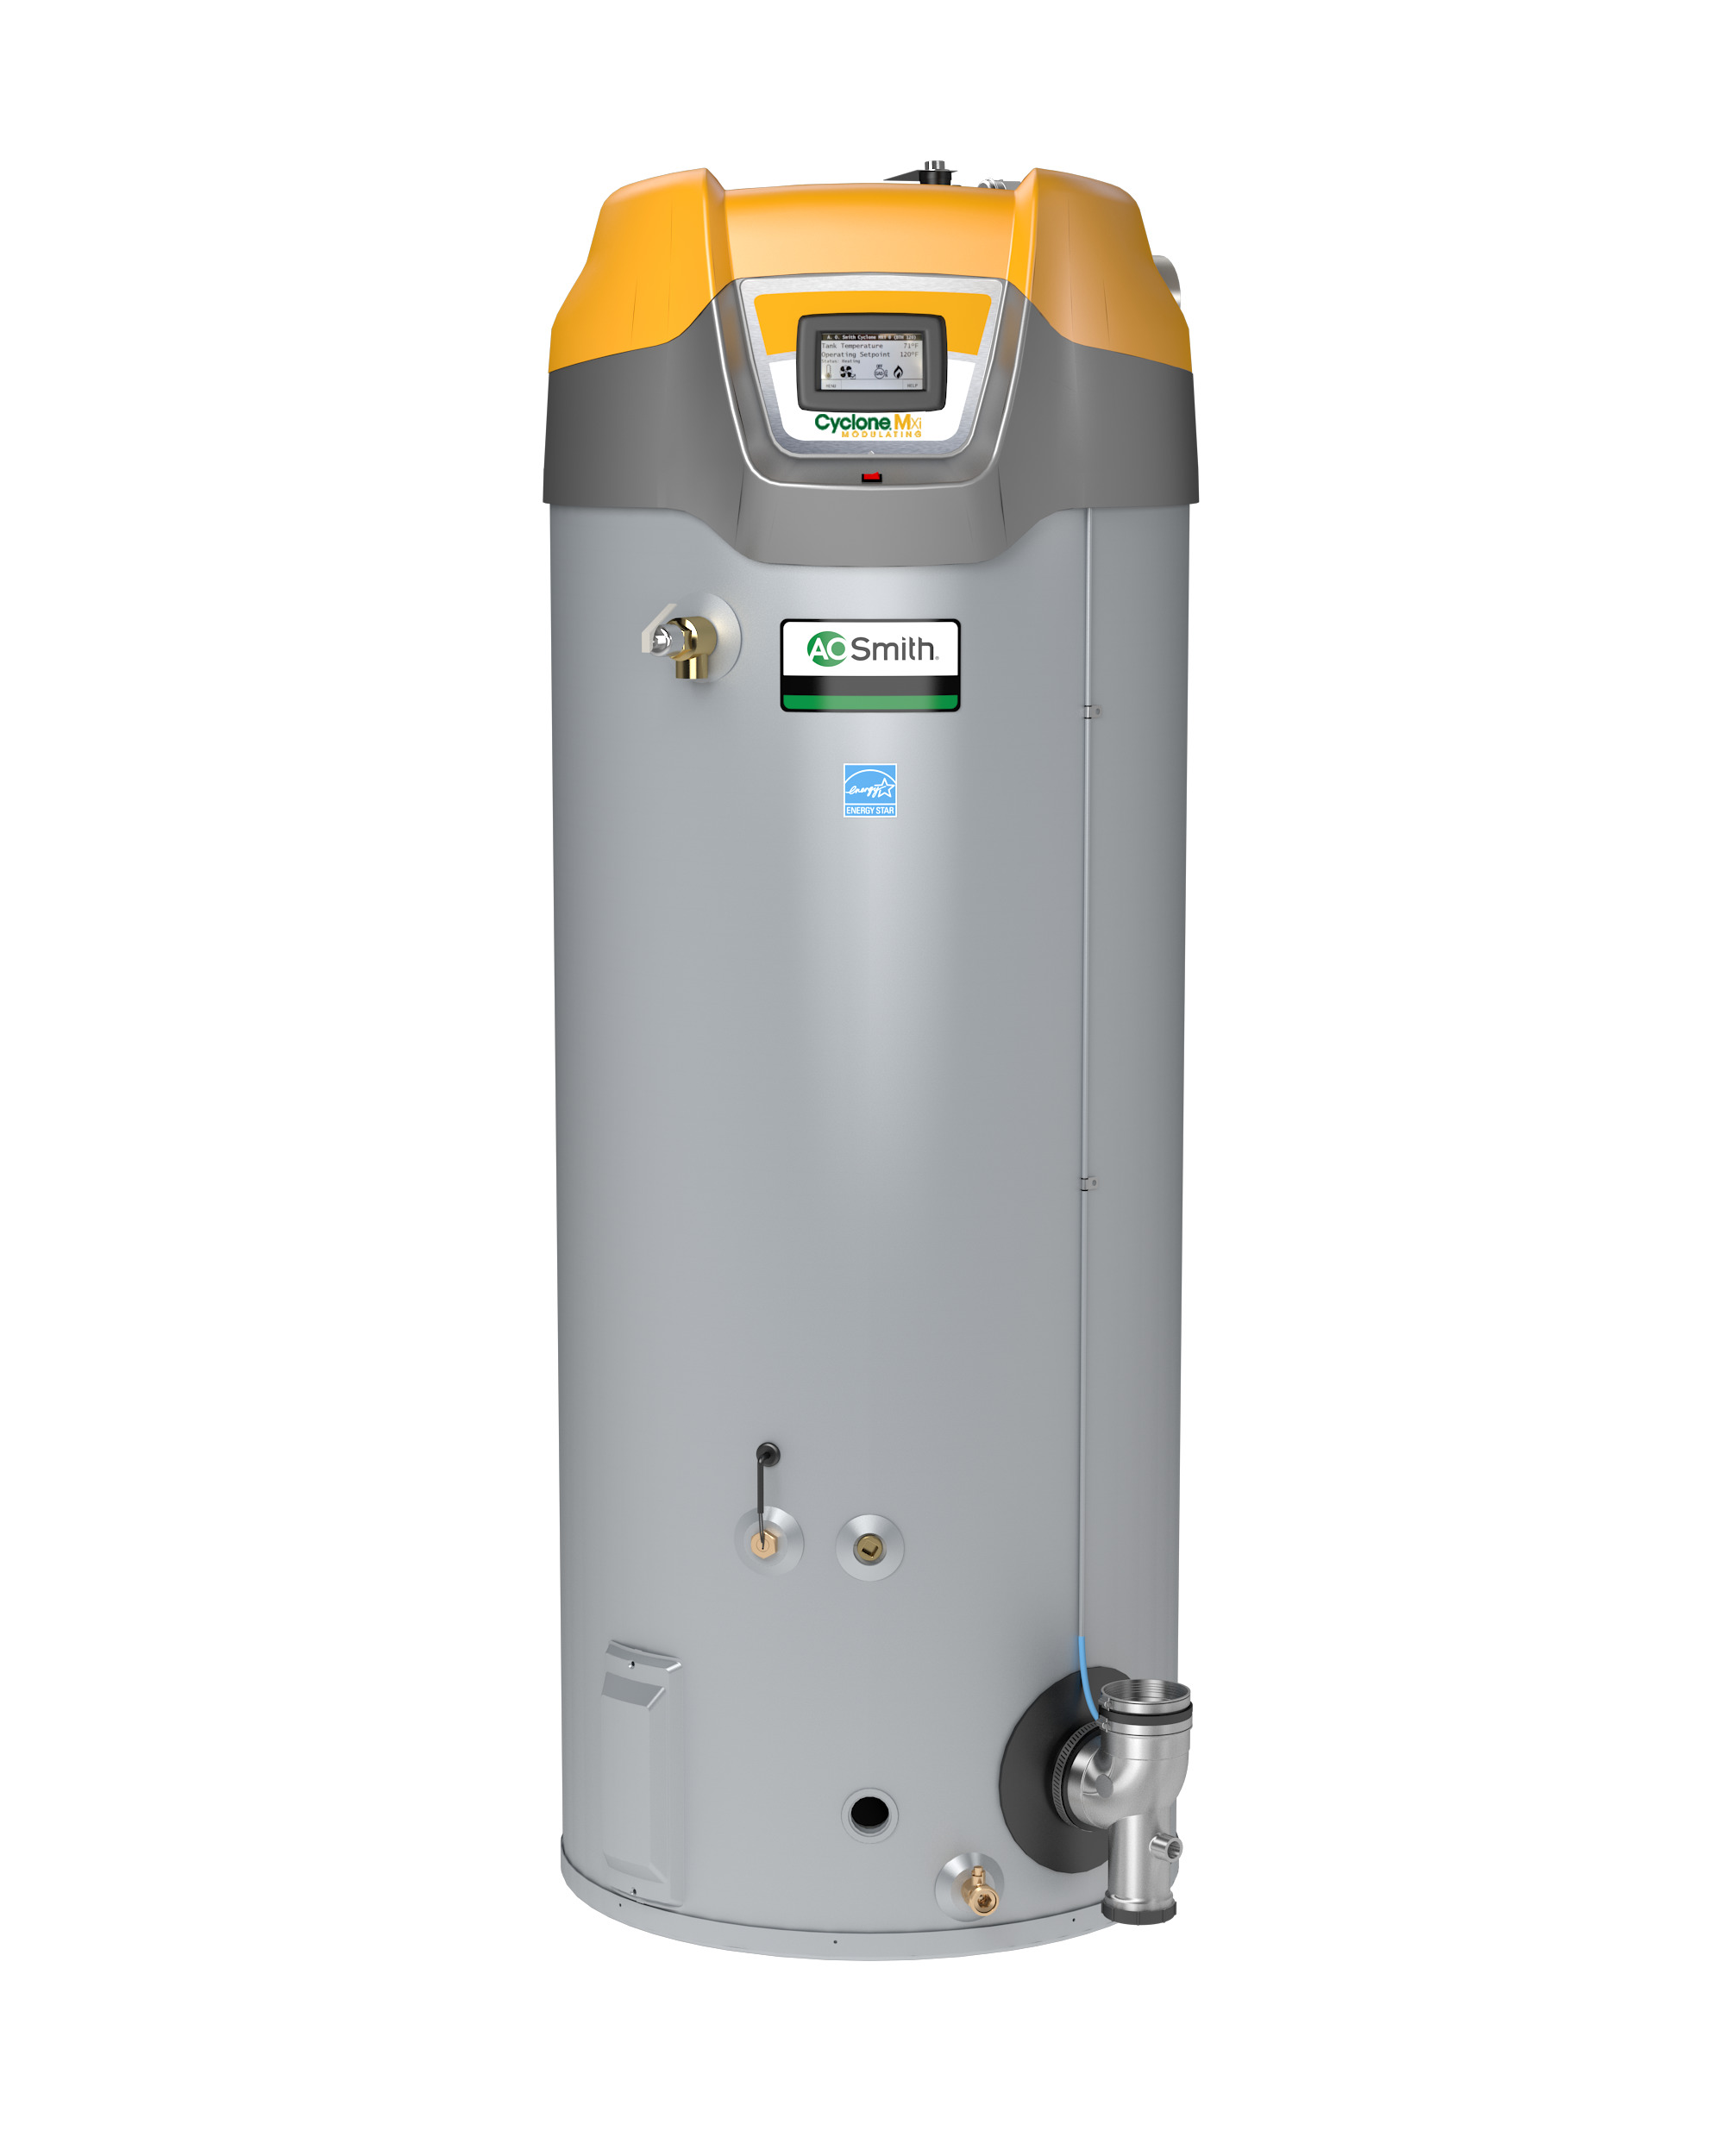 AO SMITH BTH-250: 100 GALLON, 250,000 BTU, 3" VENT, UP TO 96% THERMAL EFFICIENCY, NATURAL GAS, CYCLONE Mxi MODULATING COMMERCIAL GAS WATER HEATER